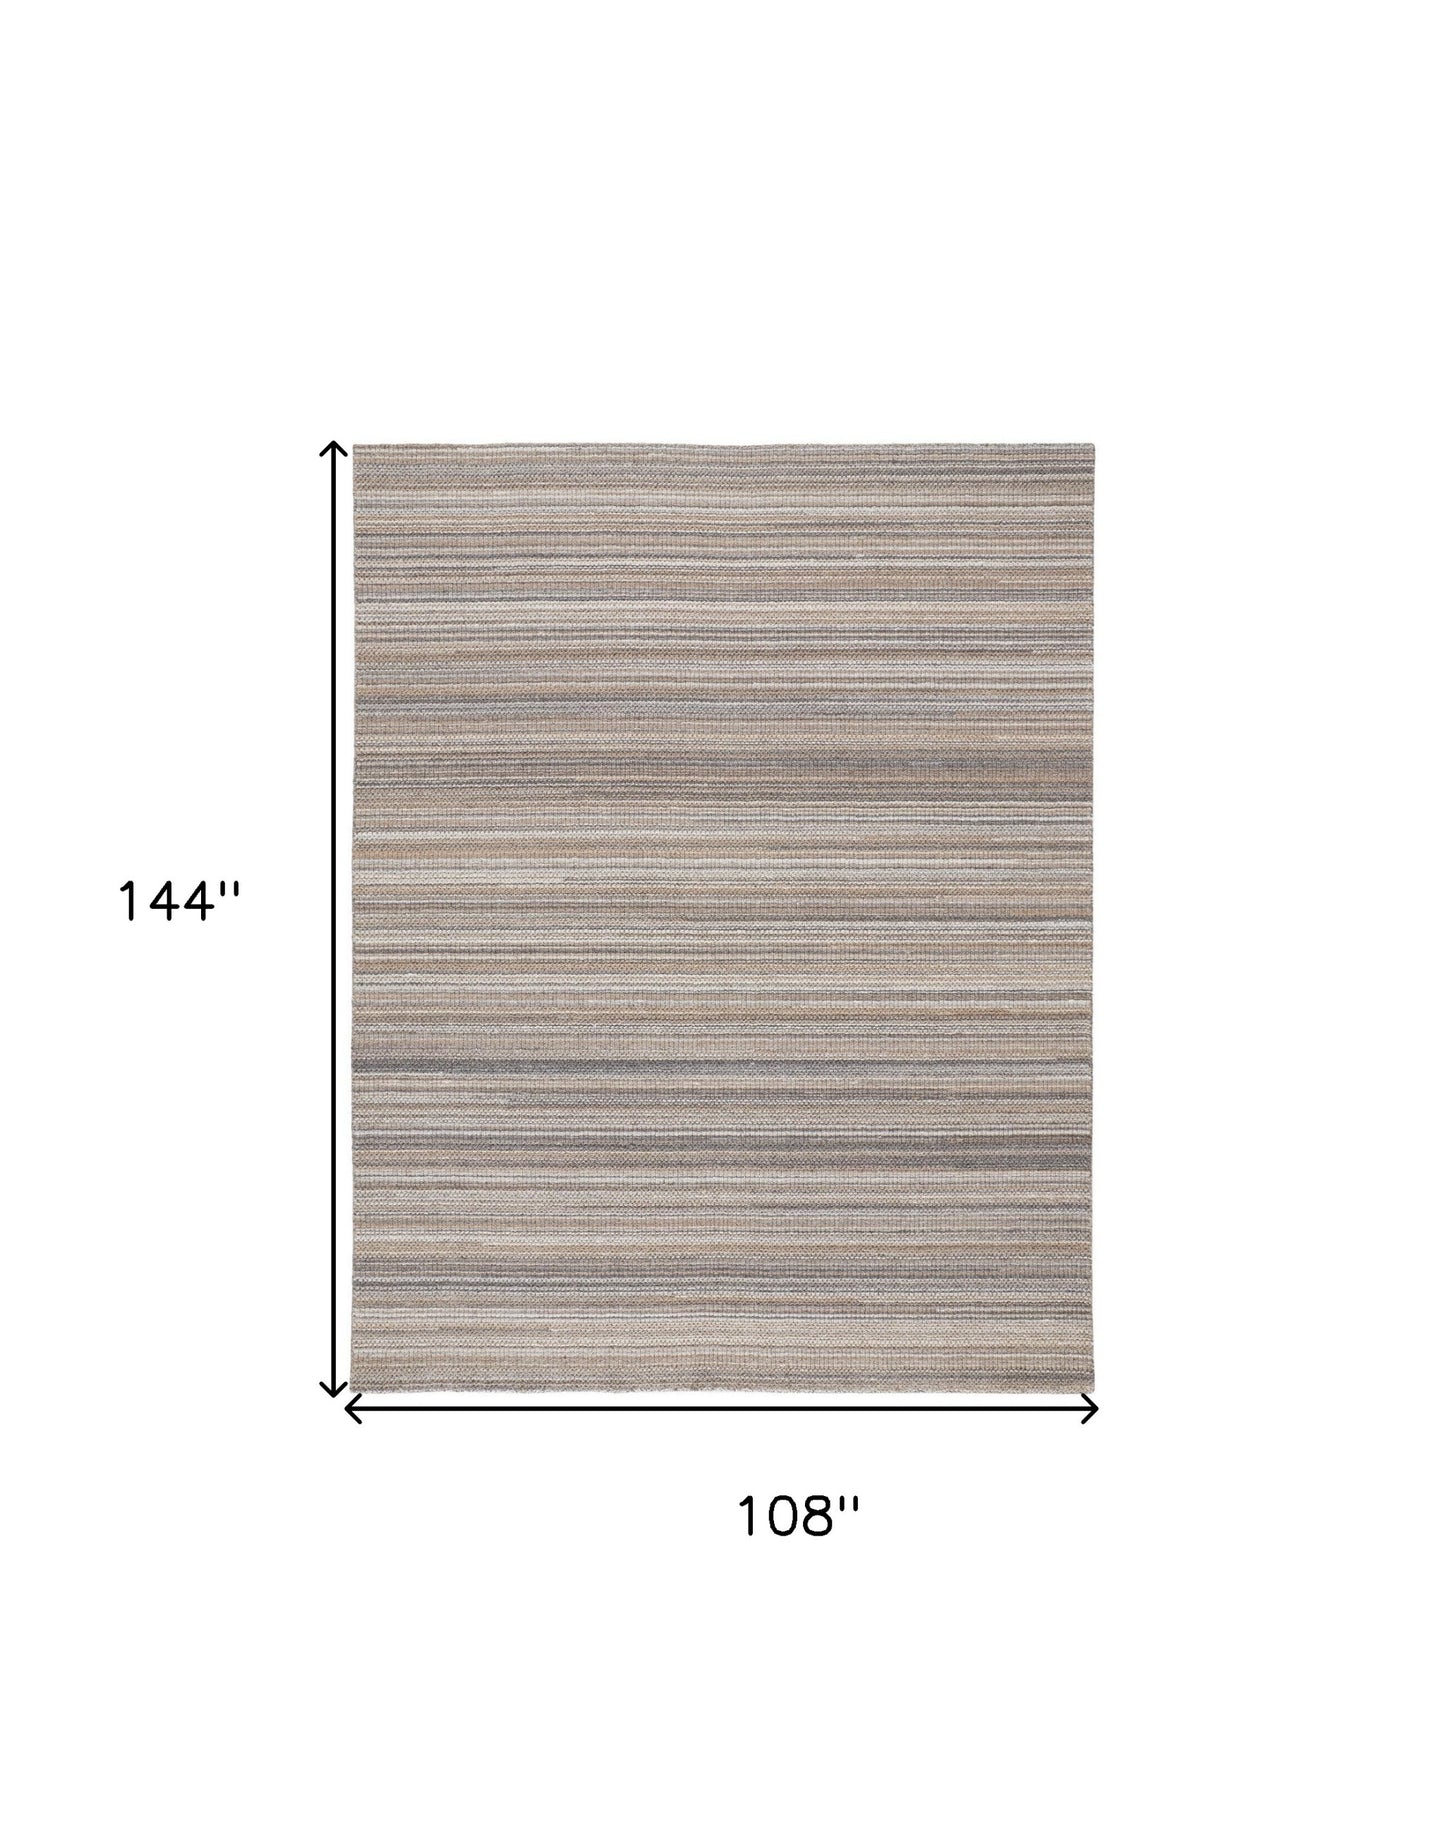 5' X 8' Ivory Wool Hand Woven Stain Resistant Area Rug